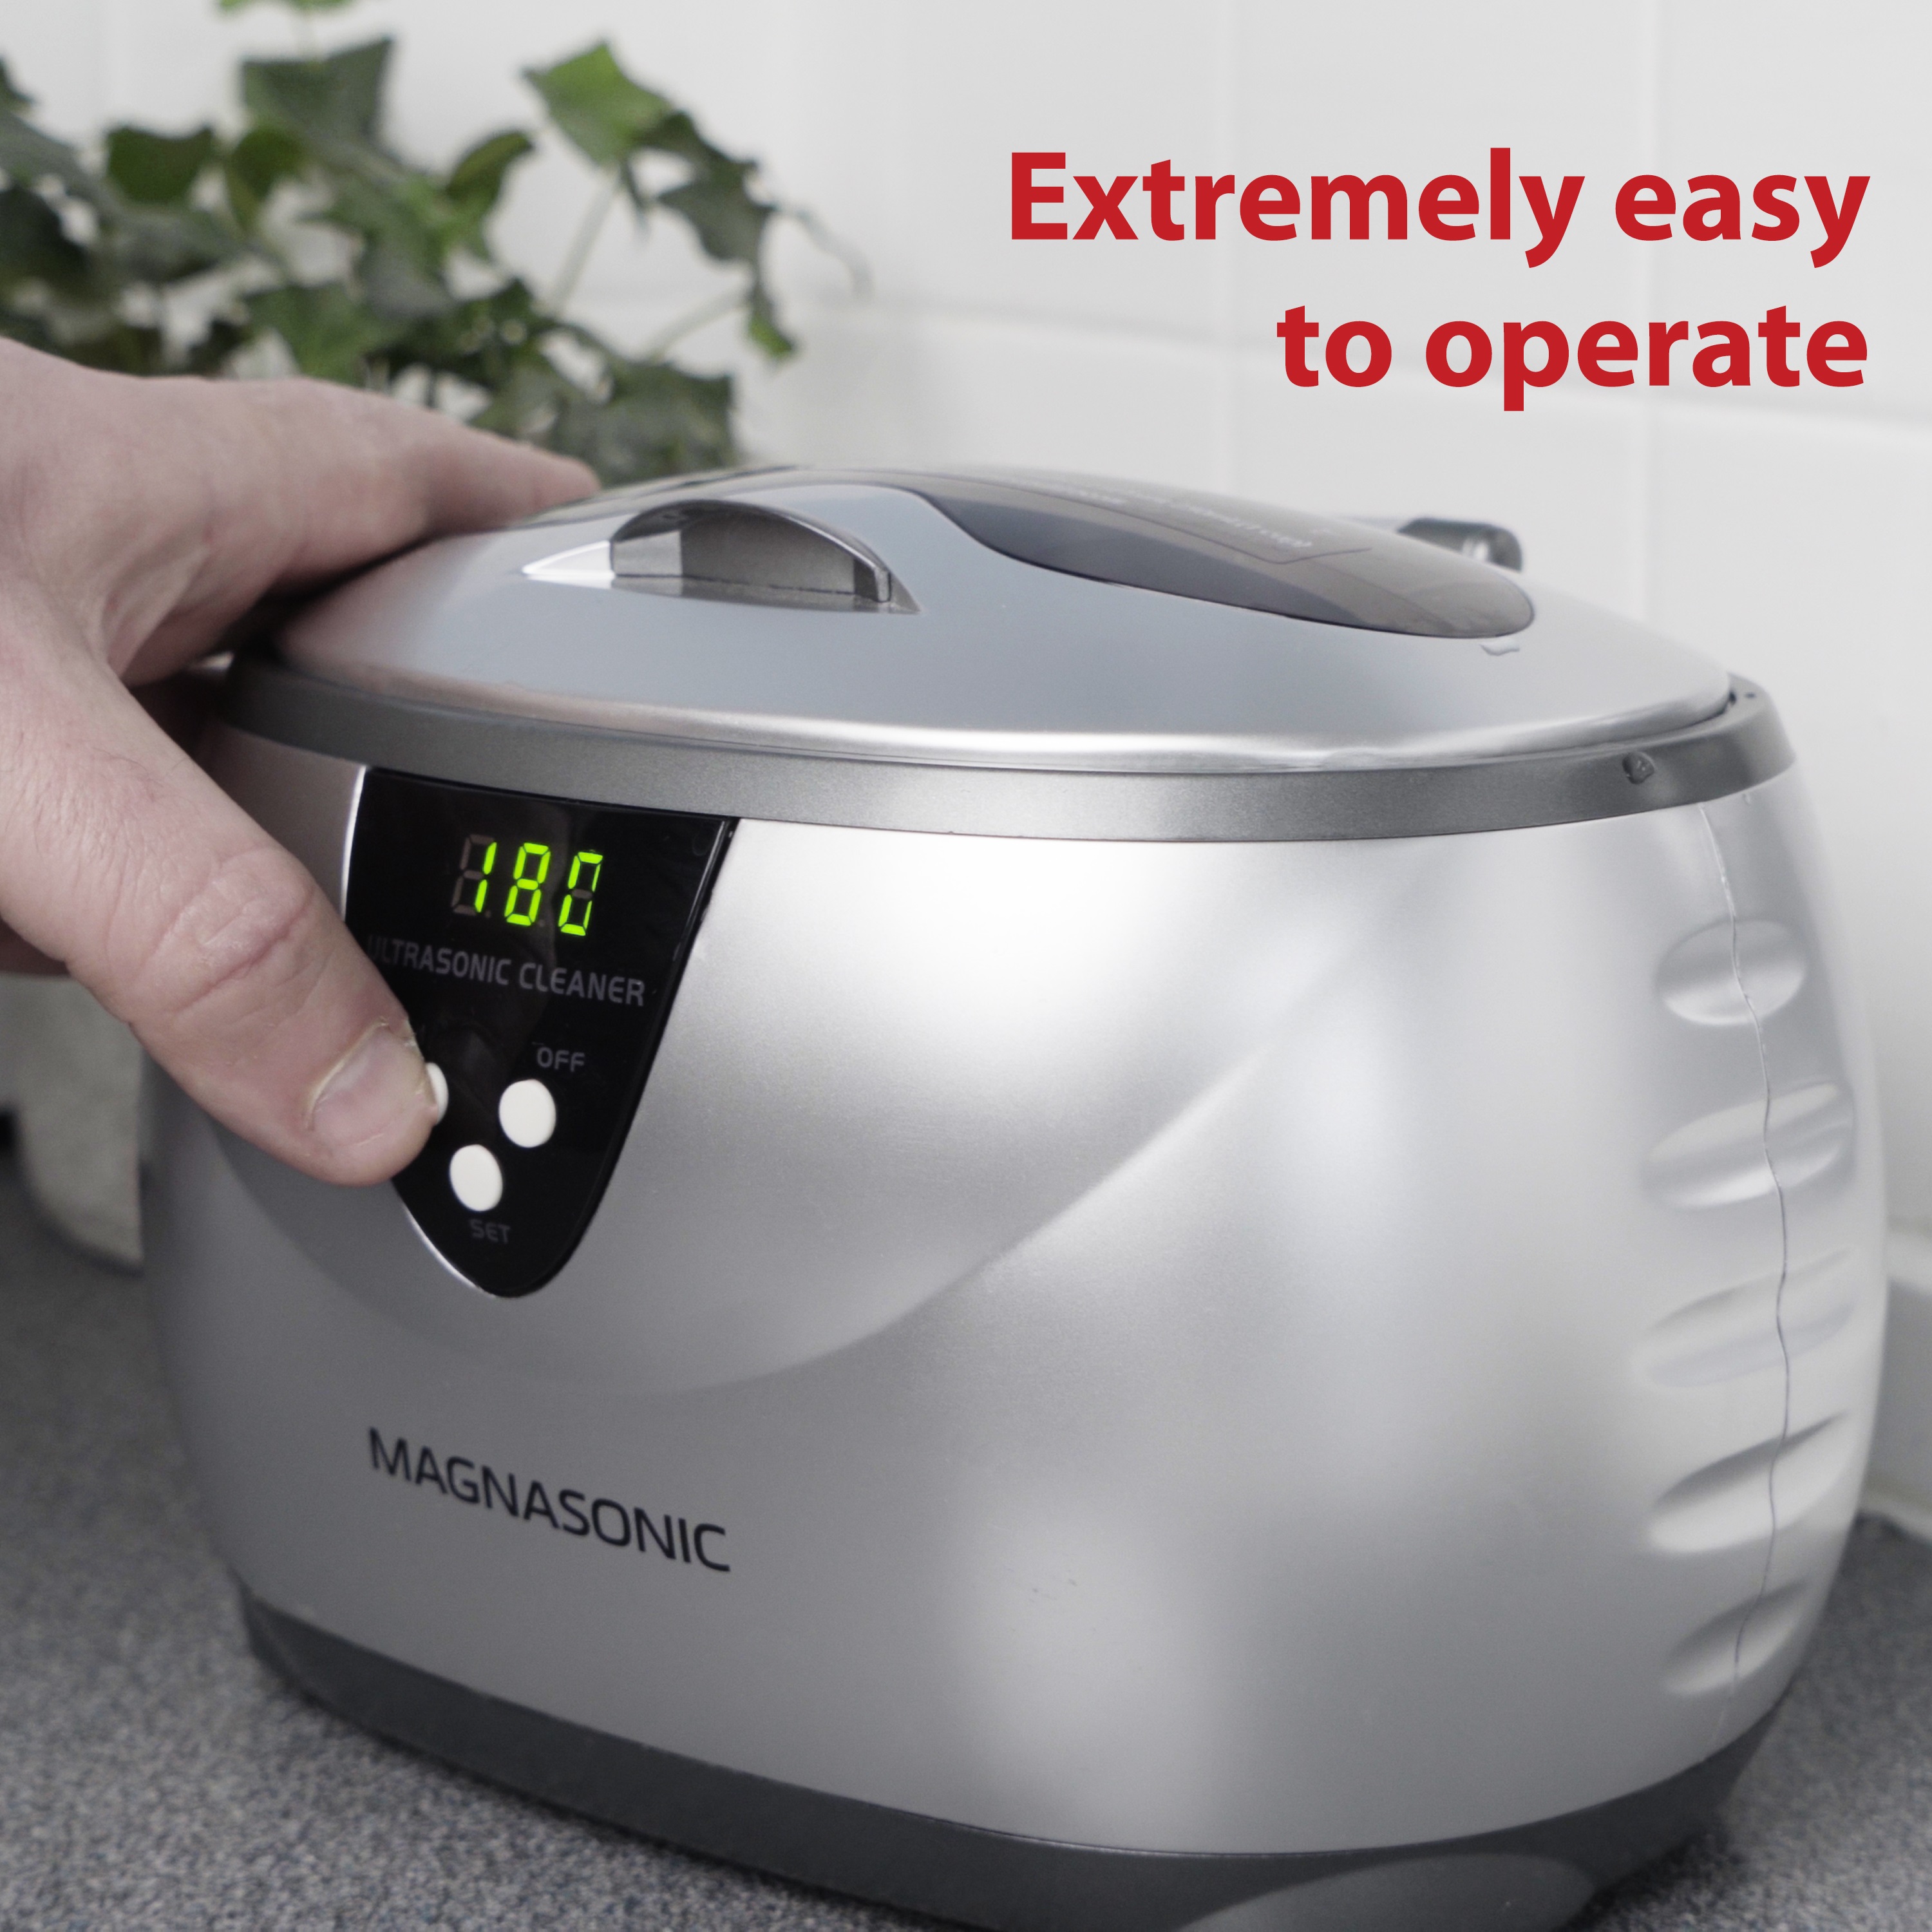 MAGNASONIC Professional Ultrasonic Jewelry & Eyeglass Cleaner With Digital Timer - 2 PACK